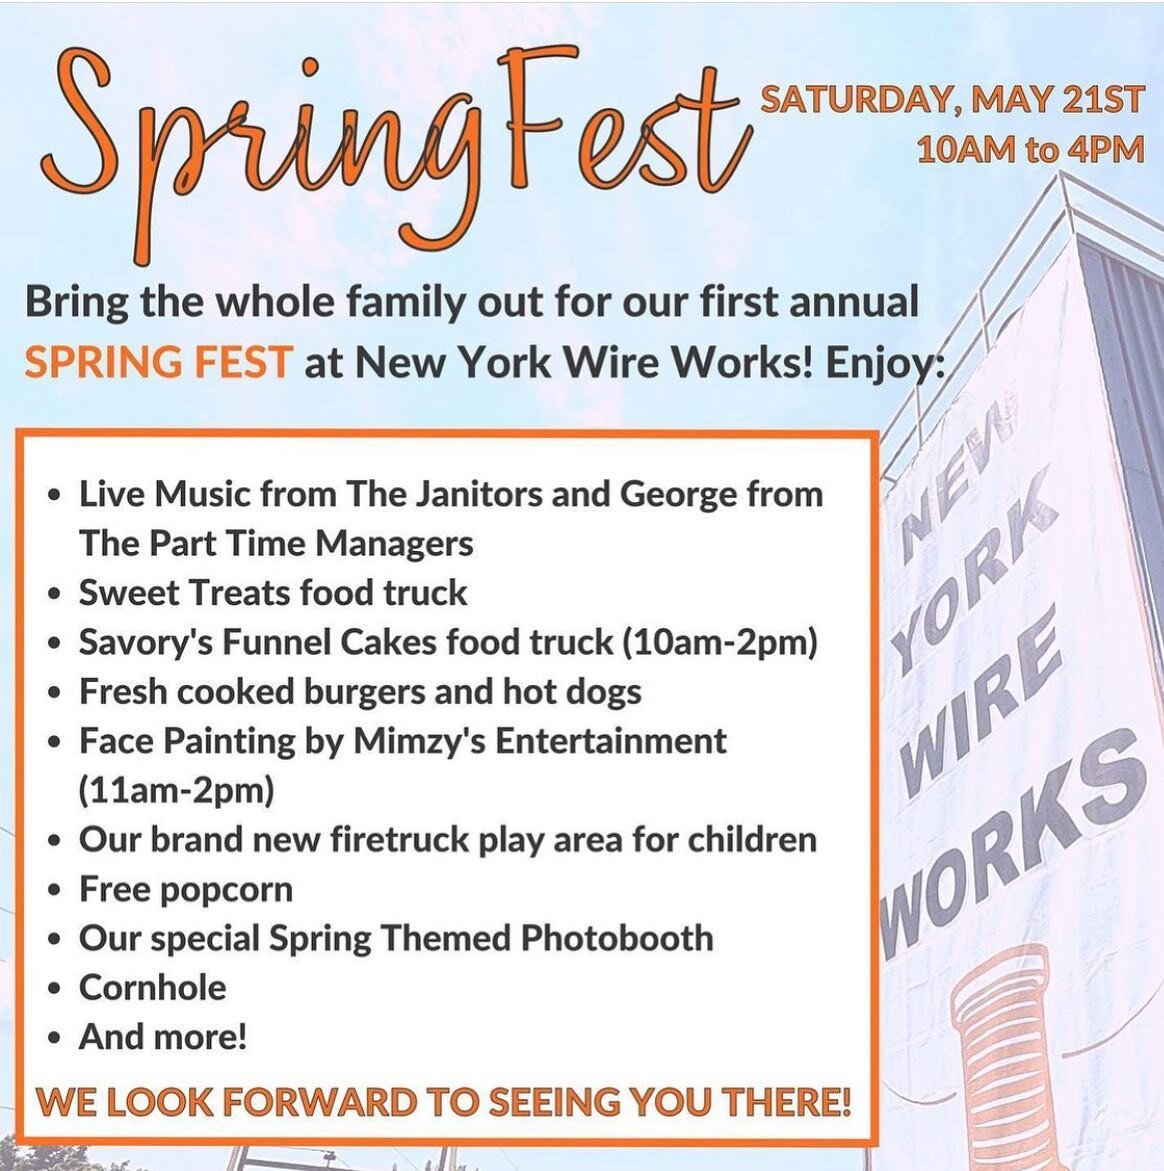 We are so happy to invite you out for our first annual 𝗦𝗣𝗥𝗜𝗡𝗚 𝗙𝗘𝗦𝗧 at New York Wire Works on Saturday, May 21st! We've got a full day of excitement for the whole family in store! 🎉🌸

𝗘𝗻𝗷𝗼𝘆:
🎶 Live Music from The Janitors and George 